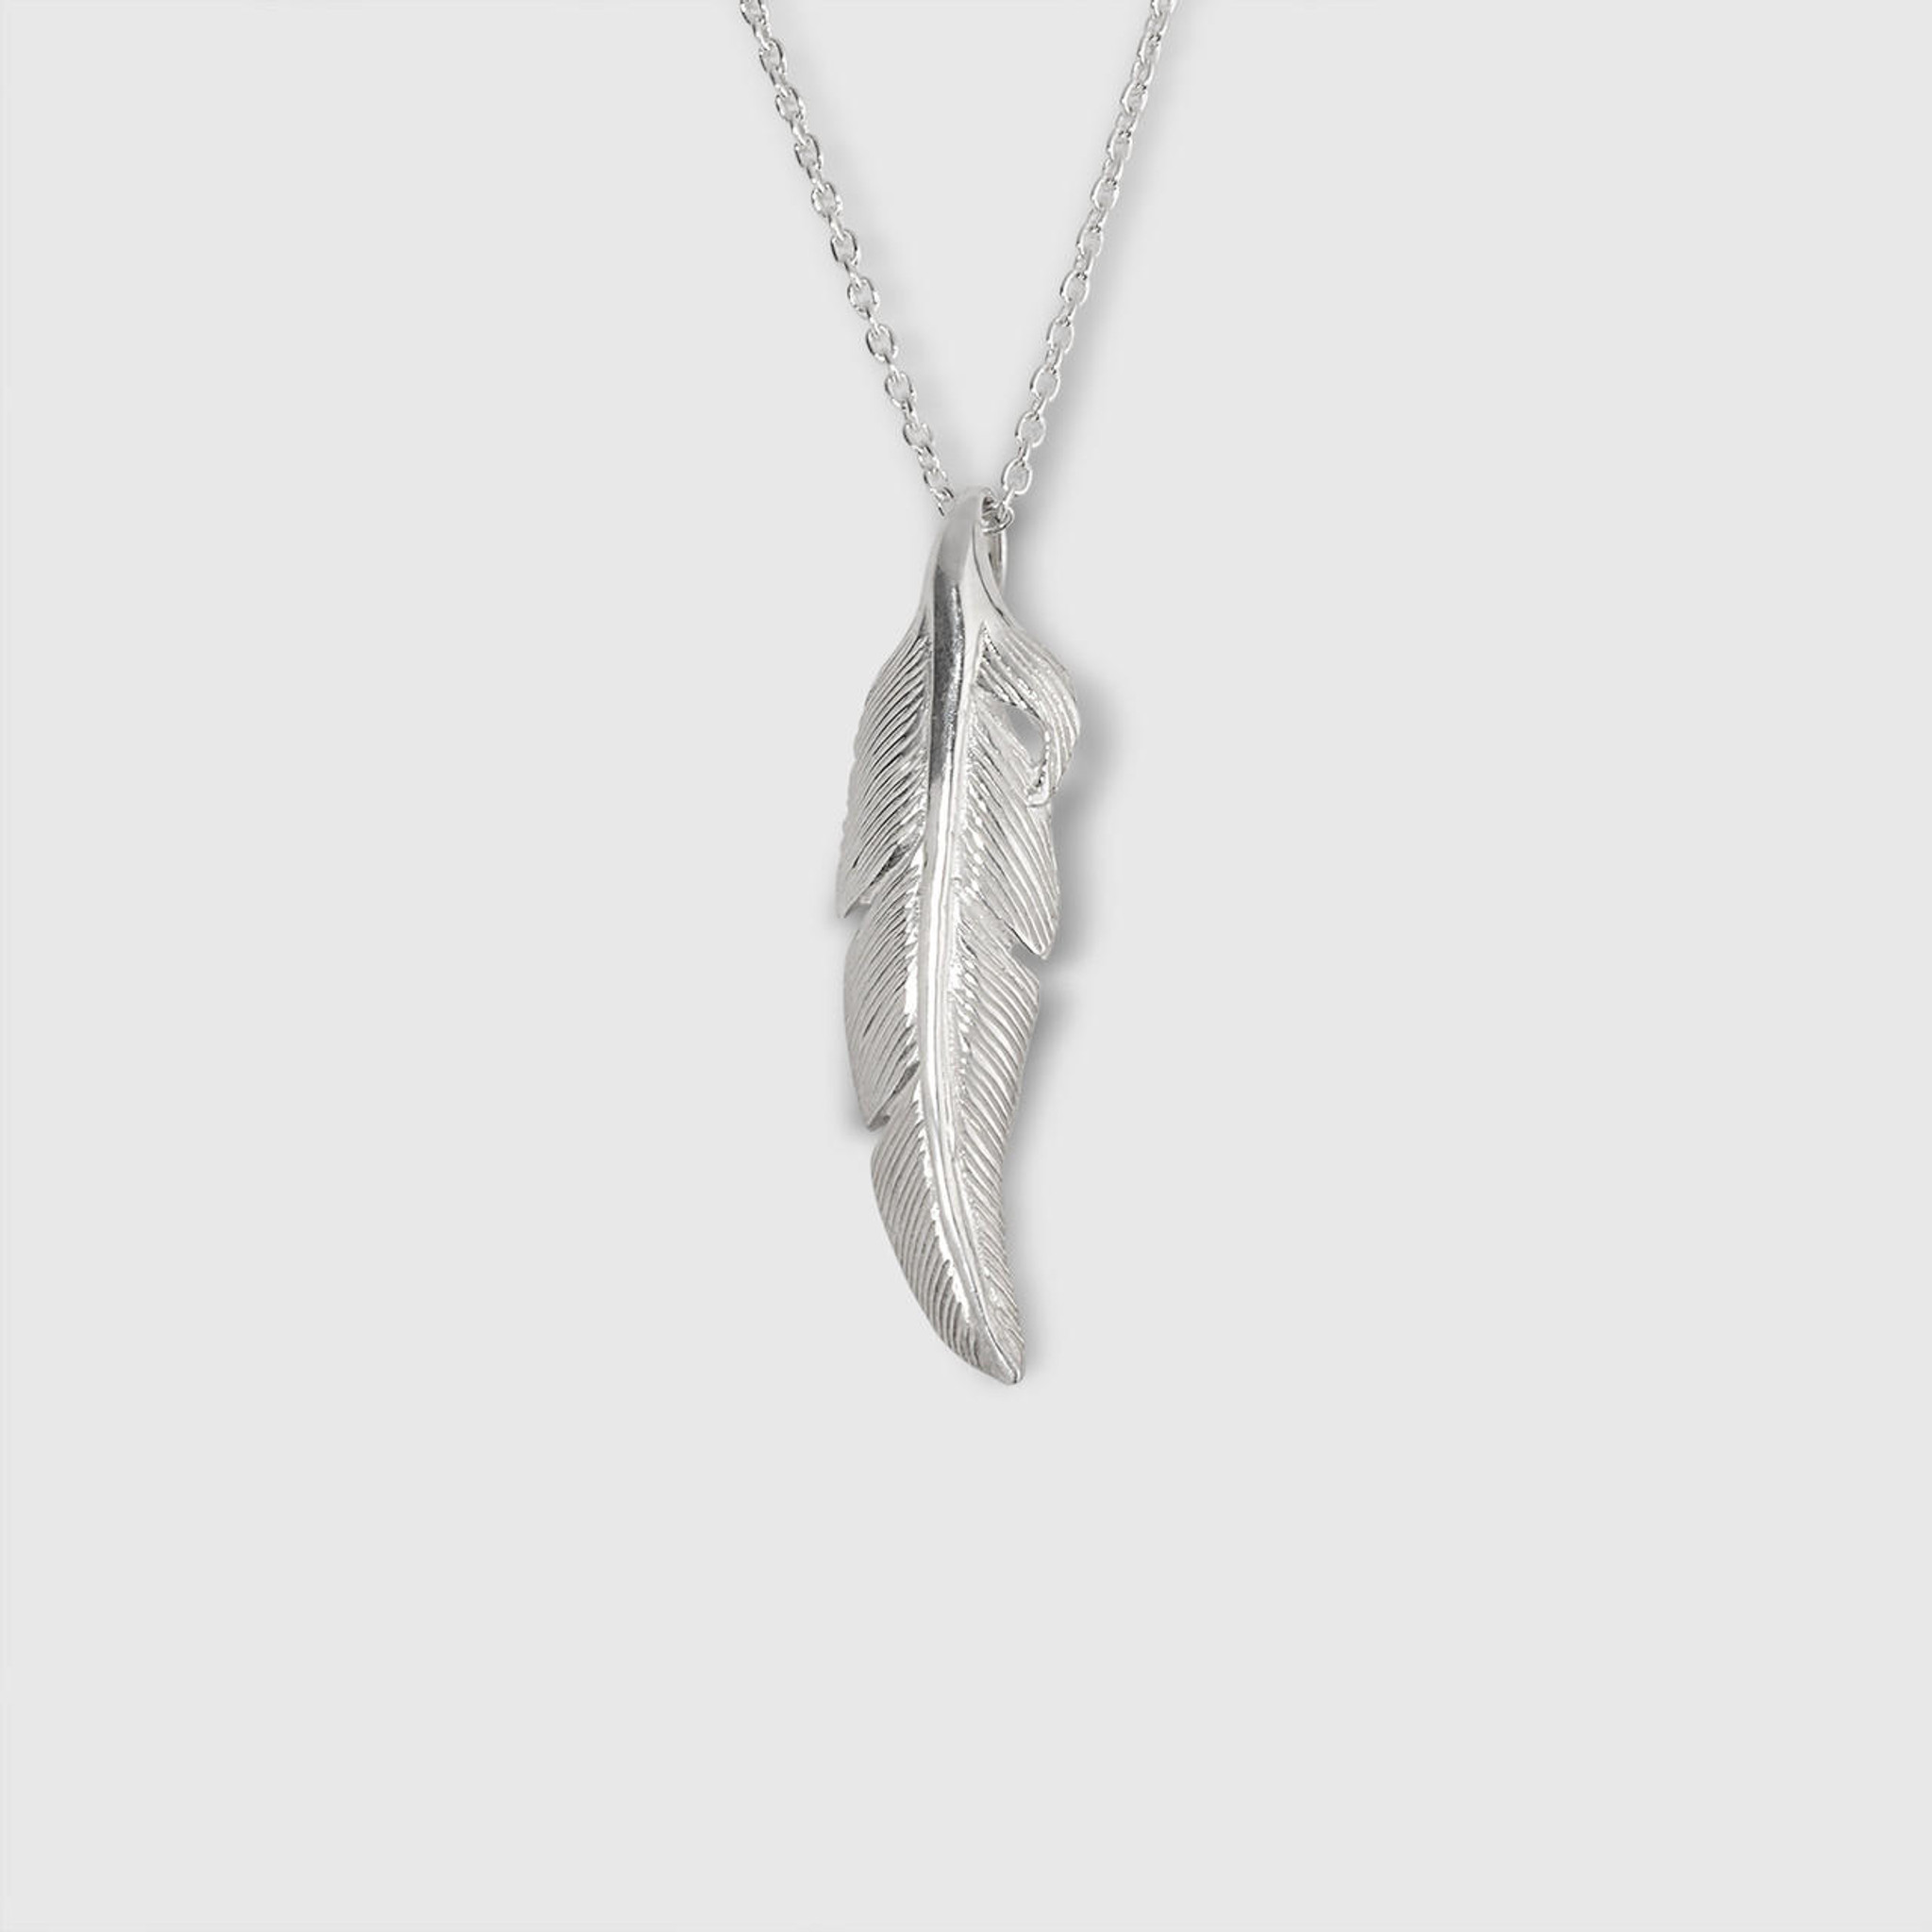 Ashley Childs Textured Feather Pendant, Sterling Silver 